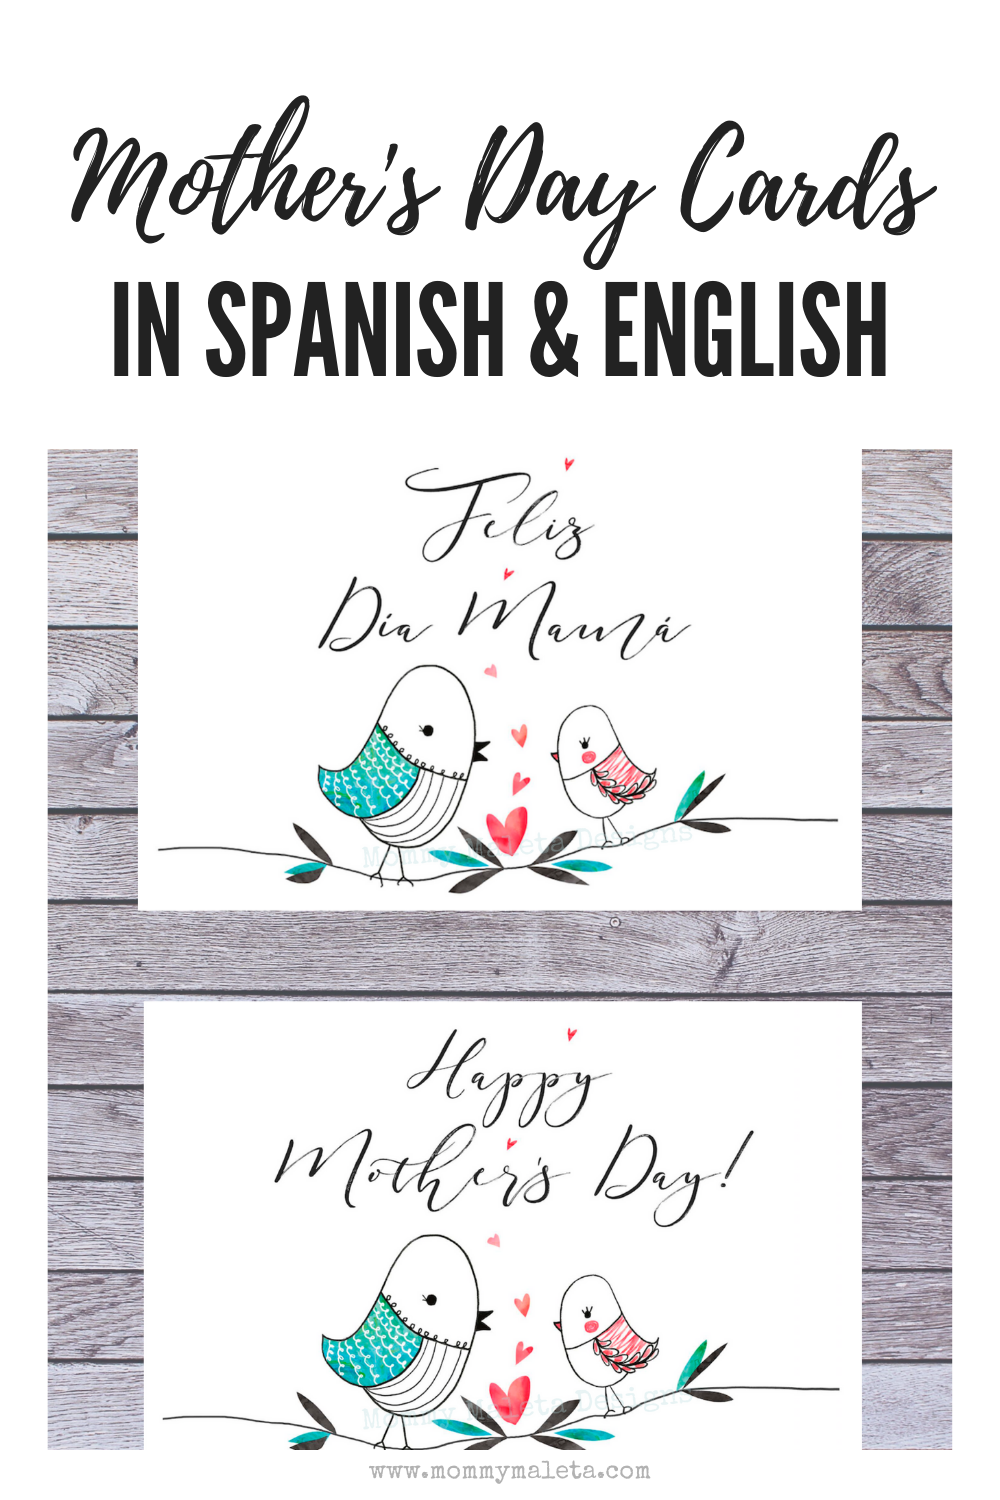 Printable Mother s Day Cards In Spanish And English MommyMaleta